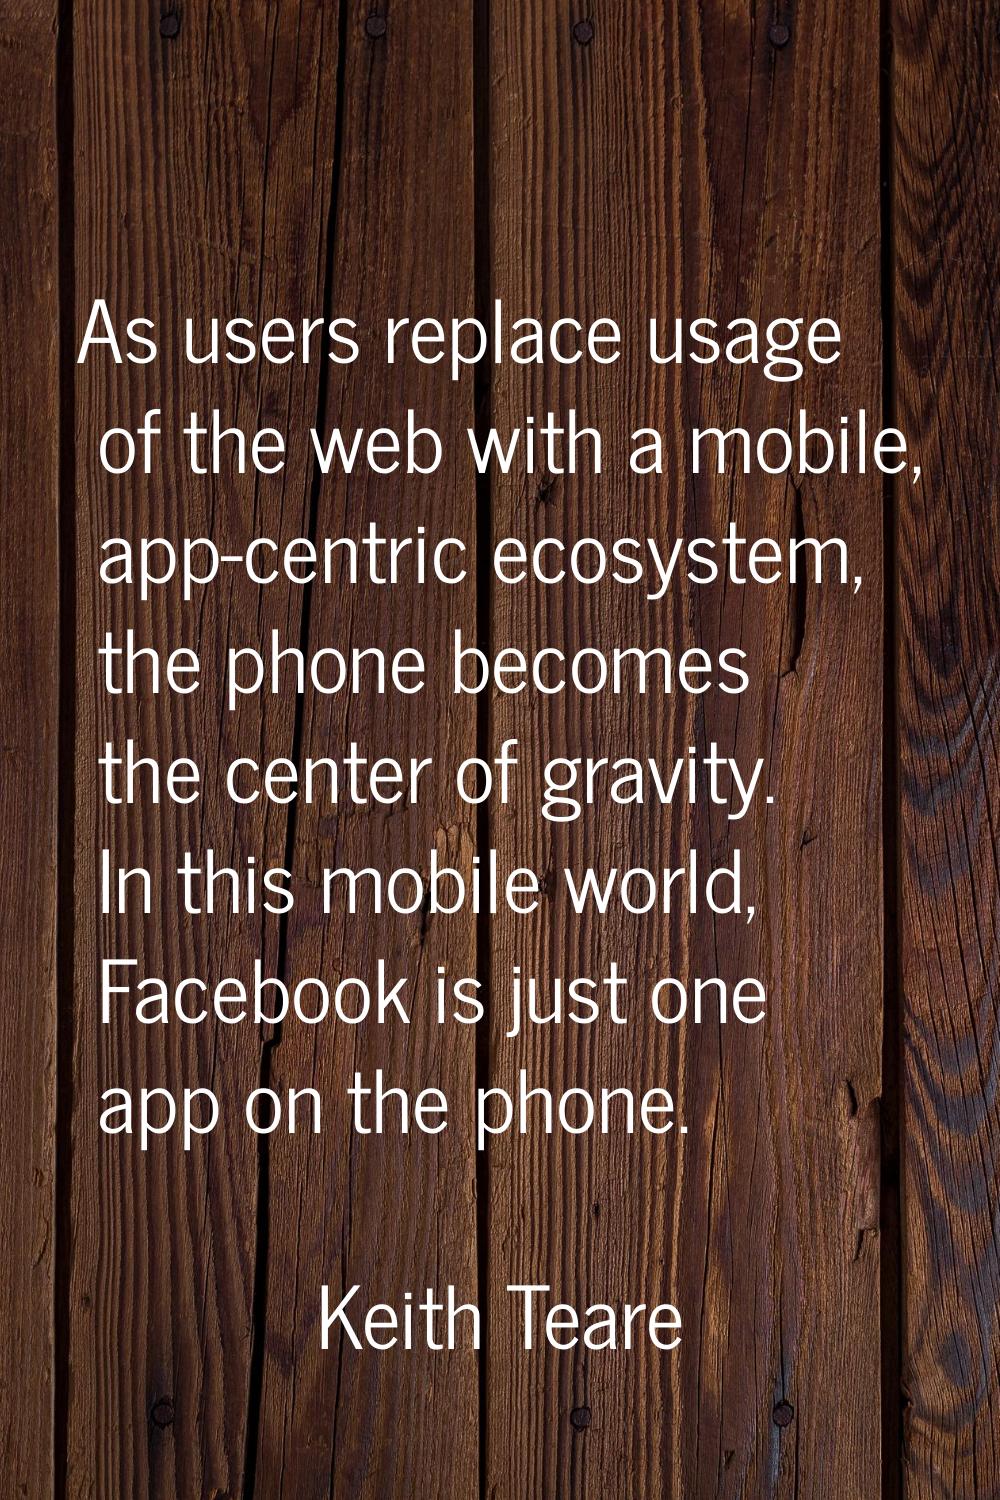 As users replace usage of the web with a mobile, app-centric ecosystem, the phone becomes the cente